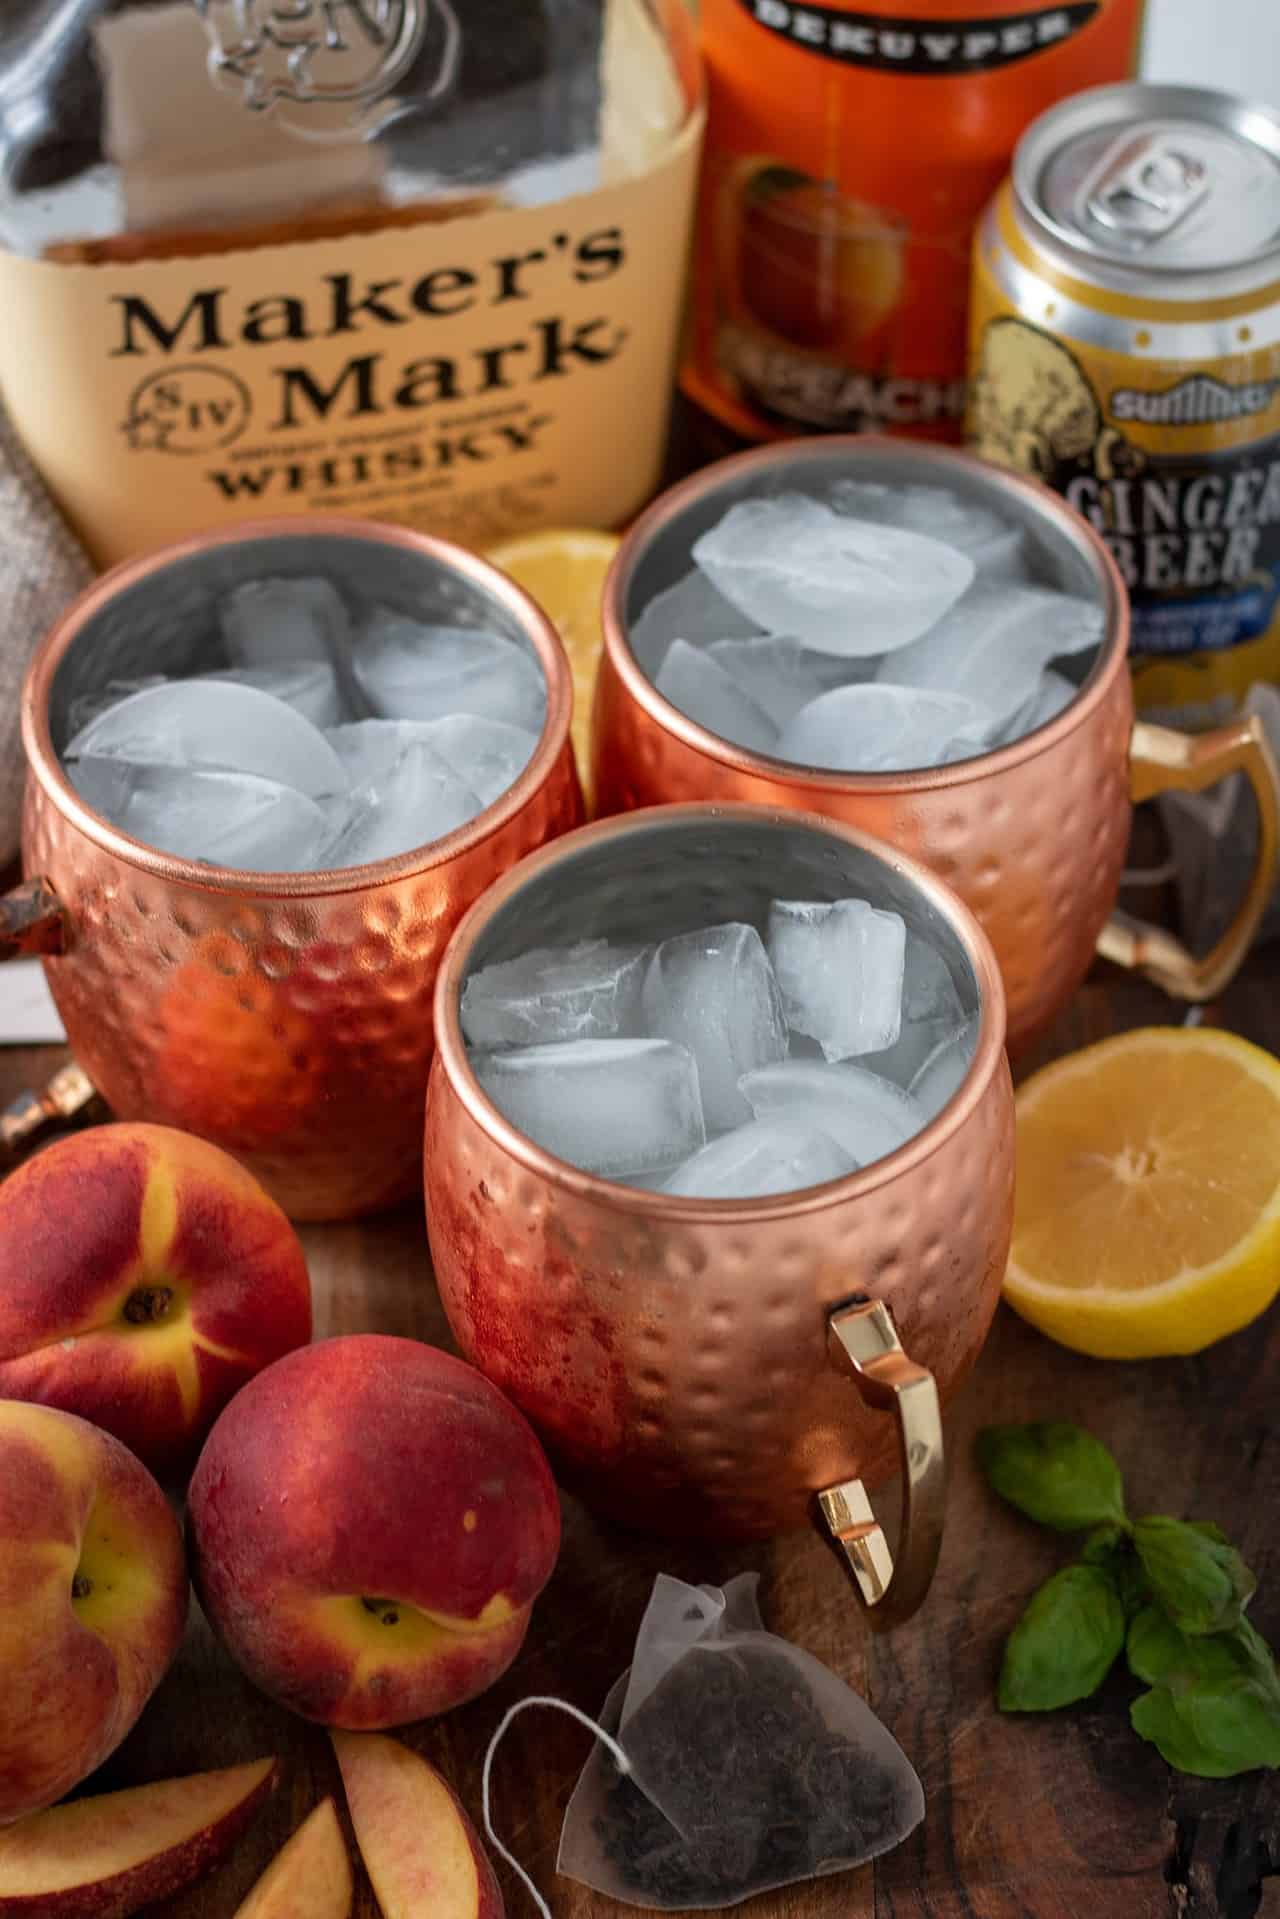 3 copper Moscow mule mugs filled with ice. There's peaches next to the mugs and a halved lemon. A bottle of bourbon is in the background. There's fresh mint sprinkled on the wooden surface too.